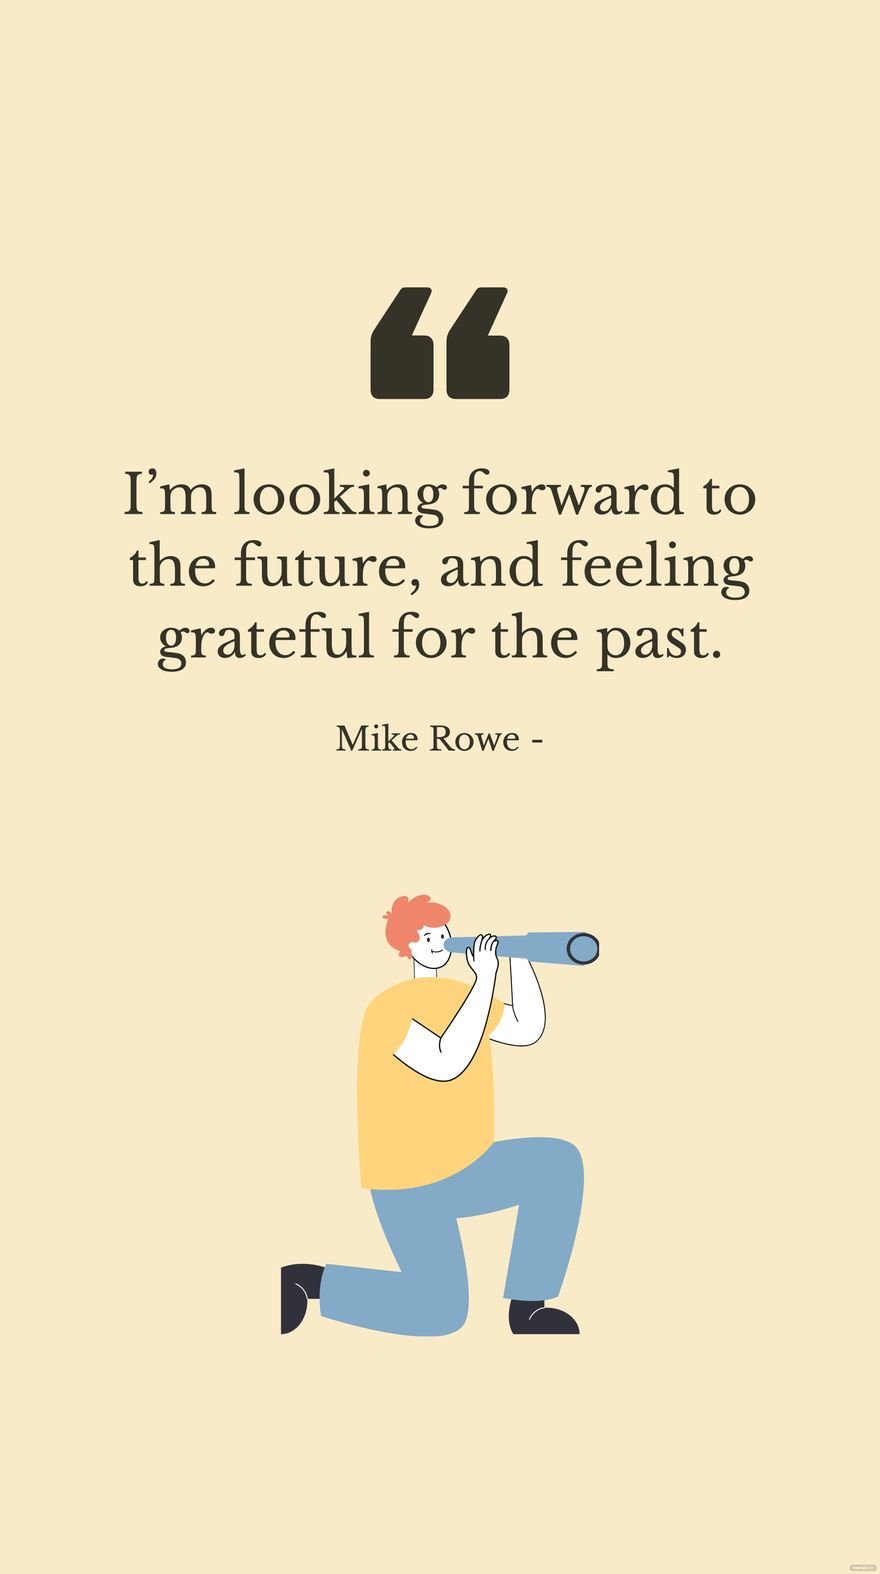 Mike Rowe - I’m looking forward to the future, and feeling grateful for the past.